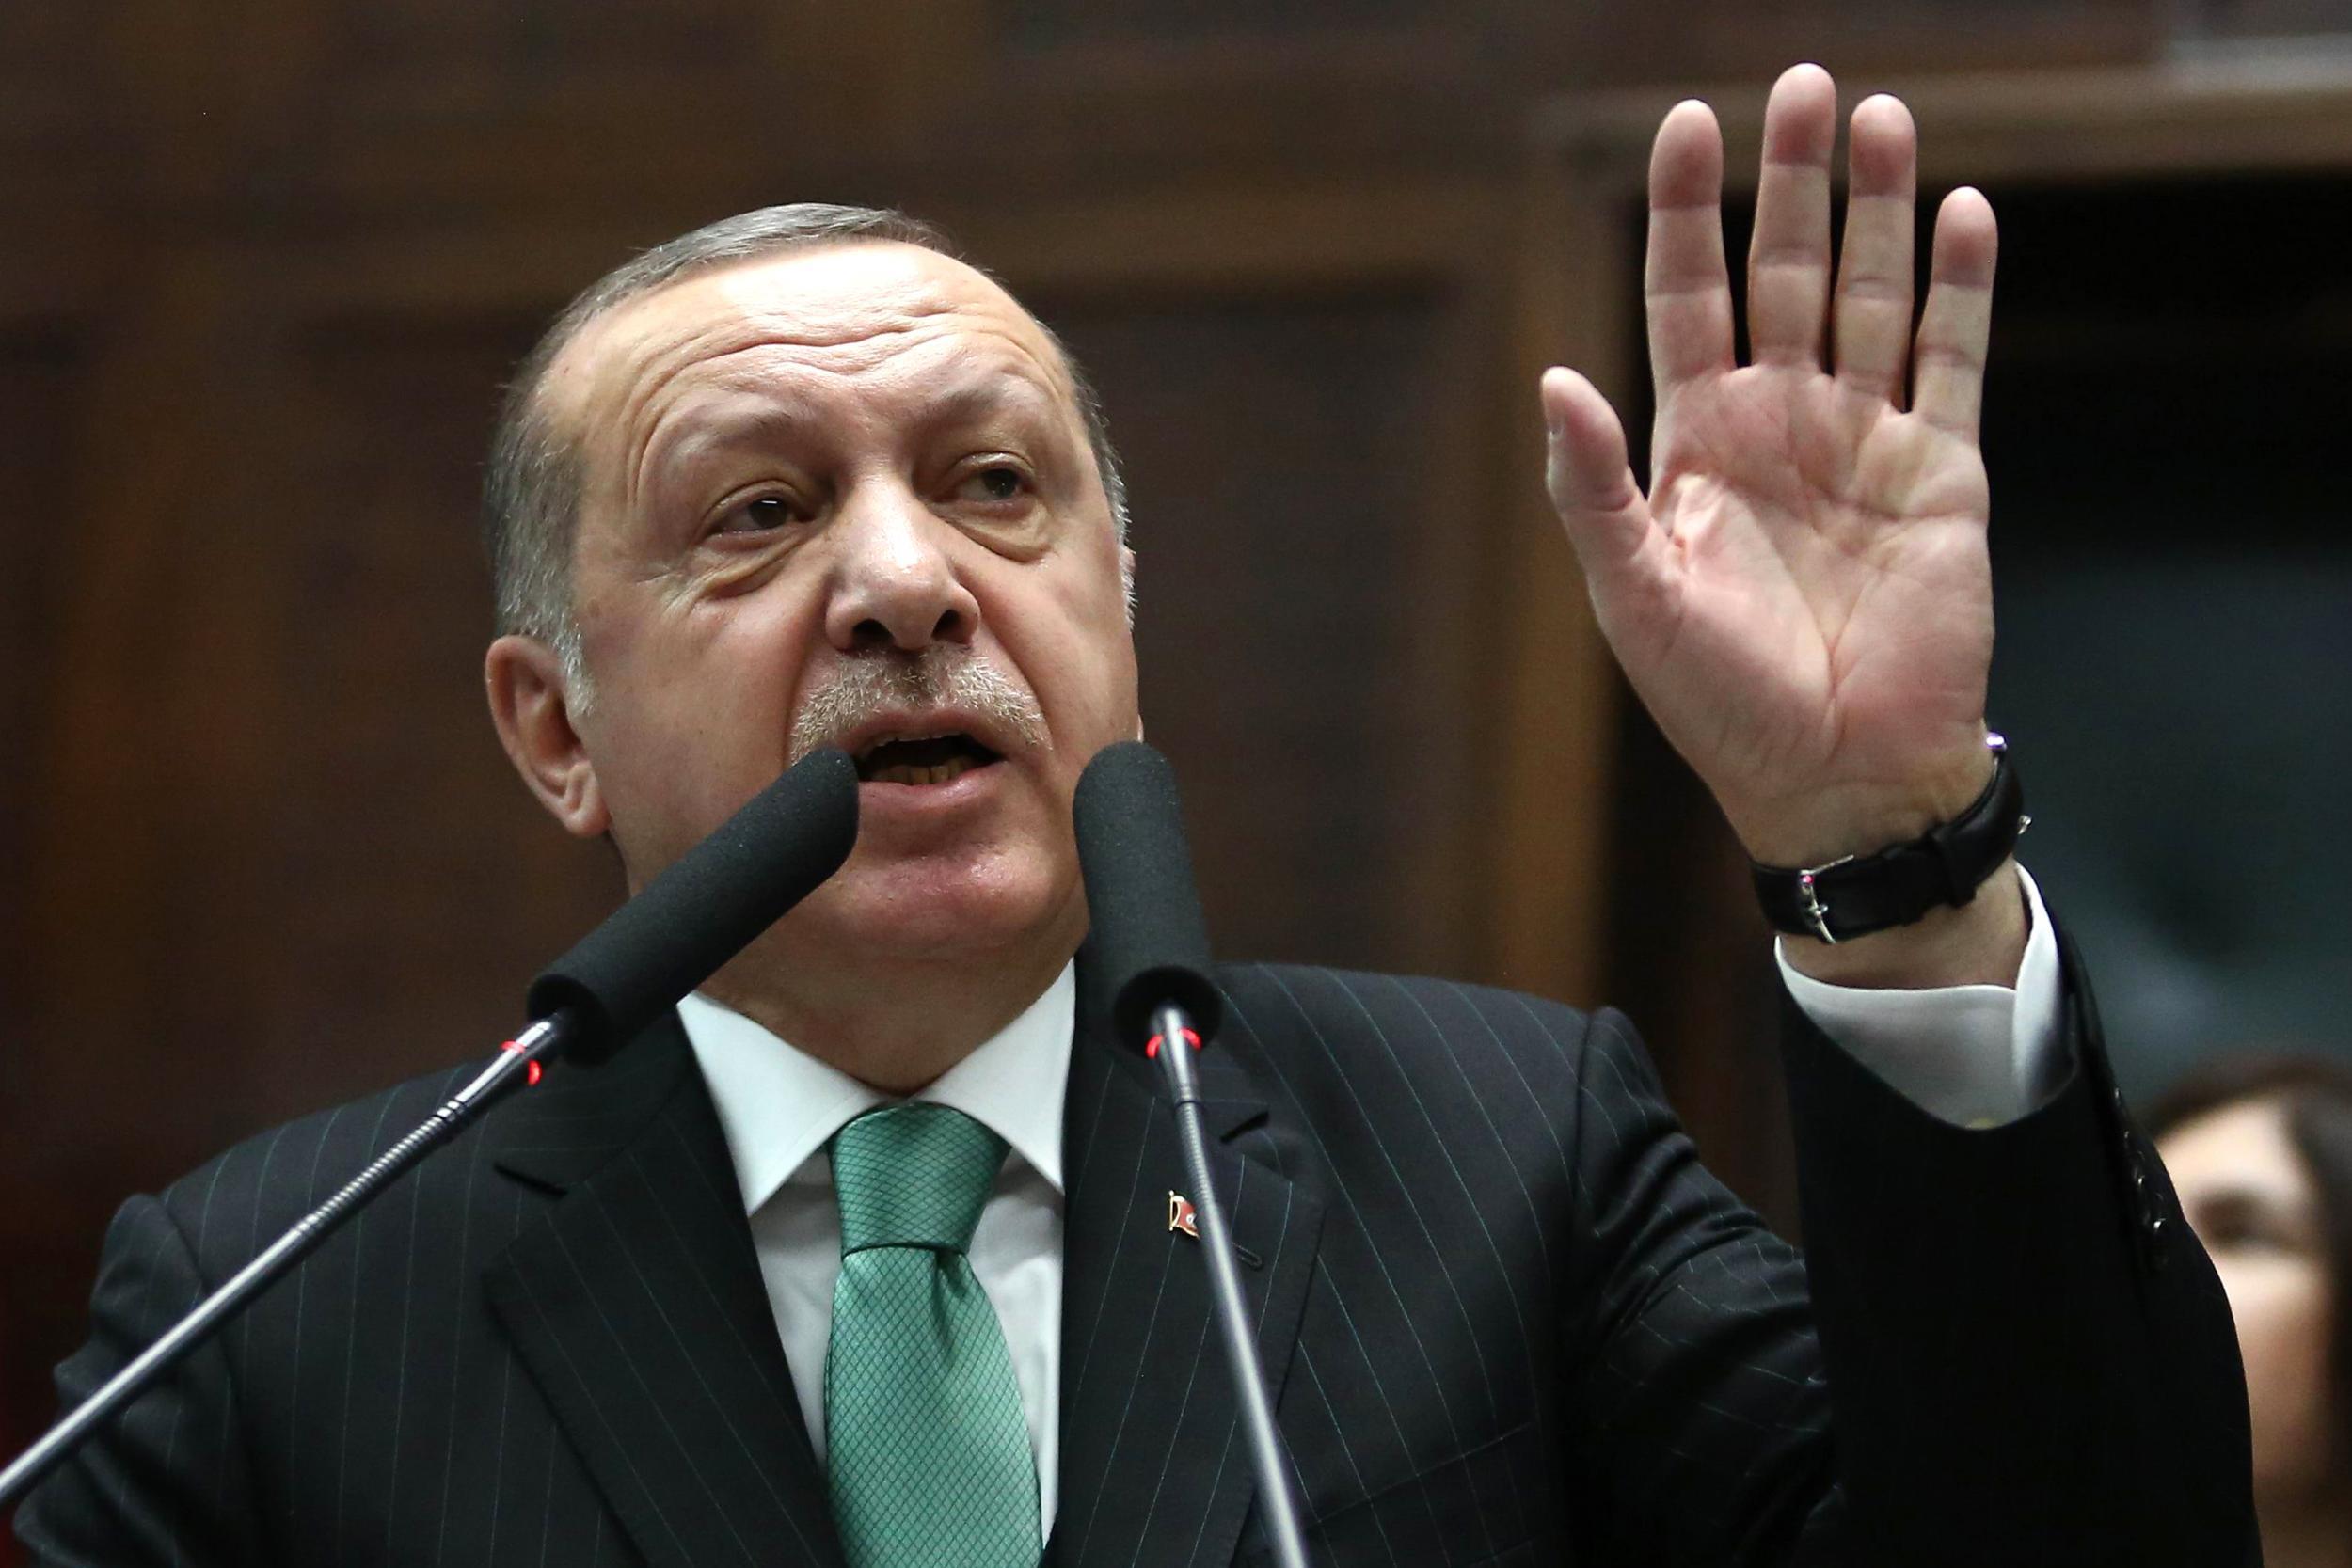 President Recep Erdogan said the issue of adultery needed to be discussed once again